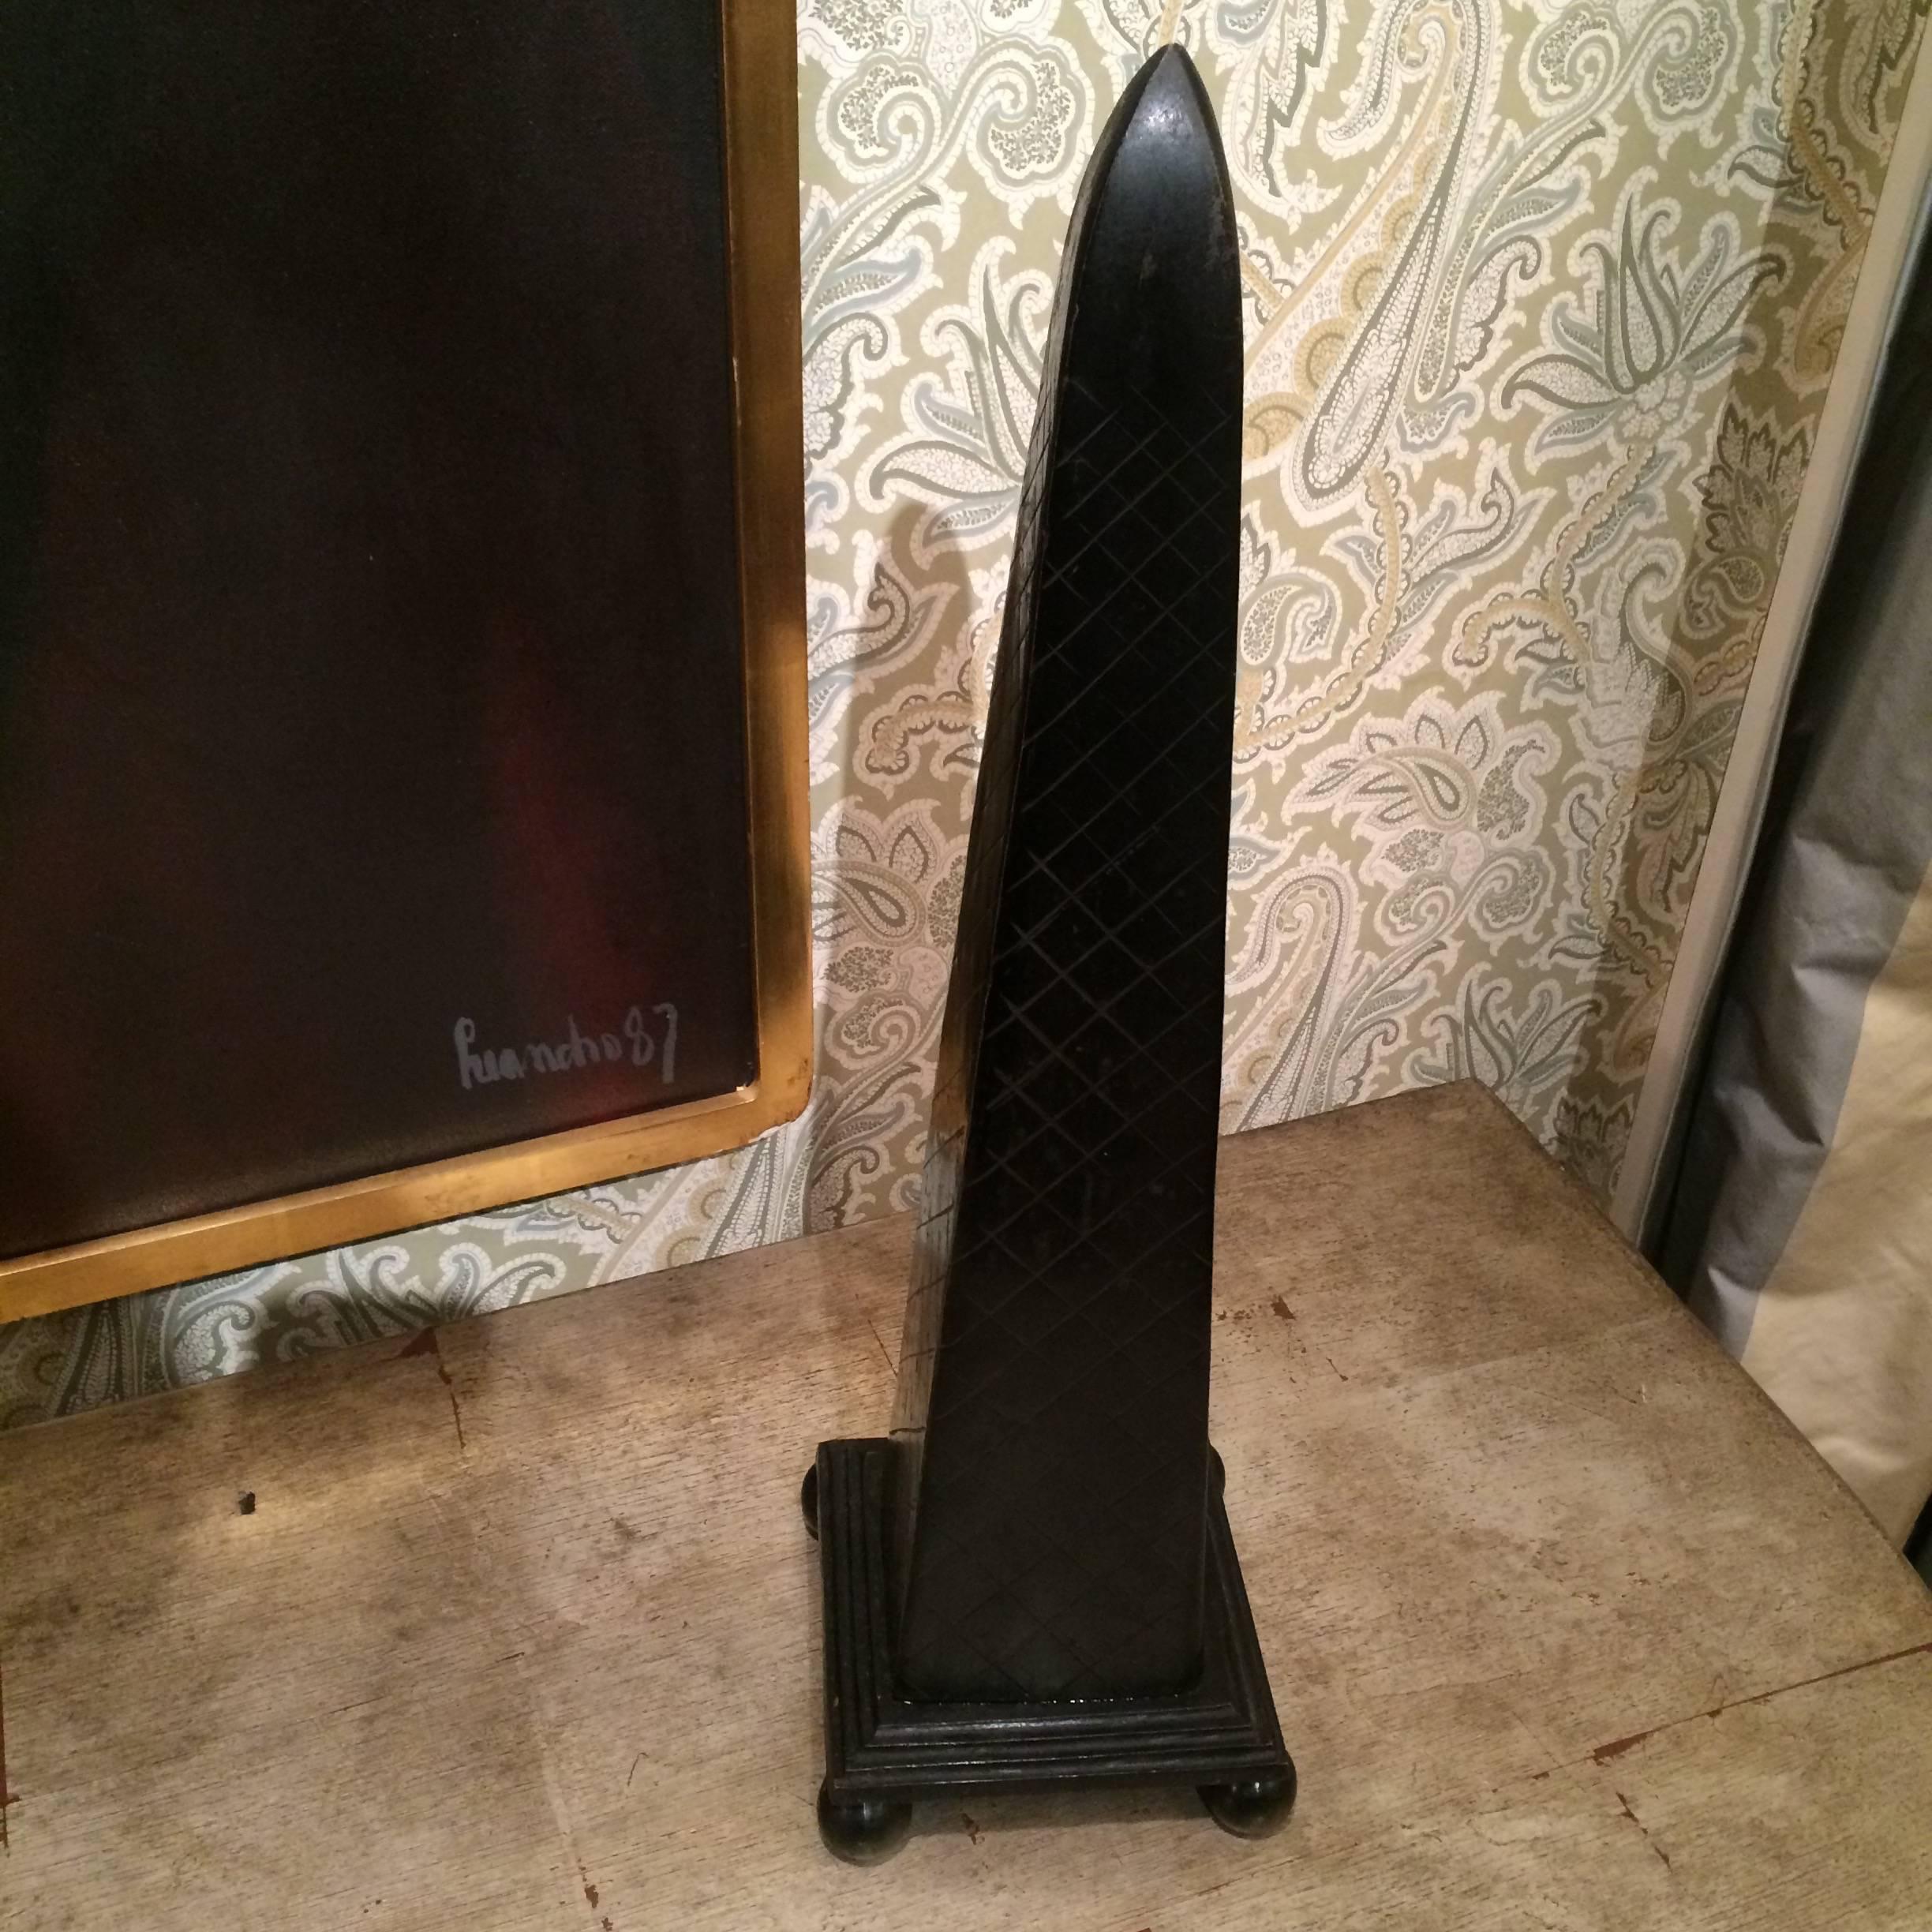 Very nice obelisk with cross hatch scored pattern on black bone-like material with black base and round feet.